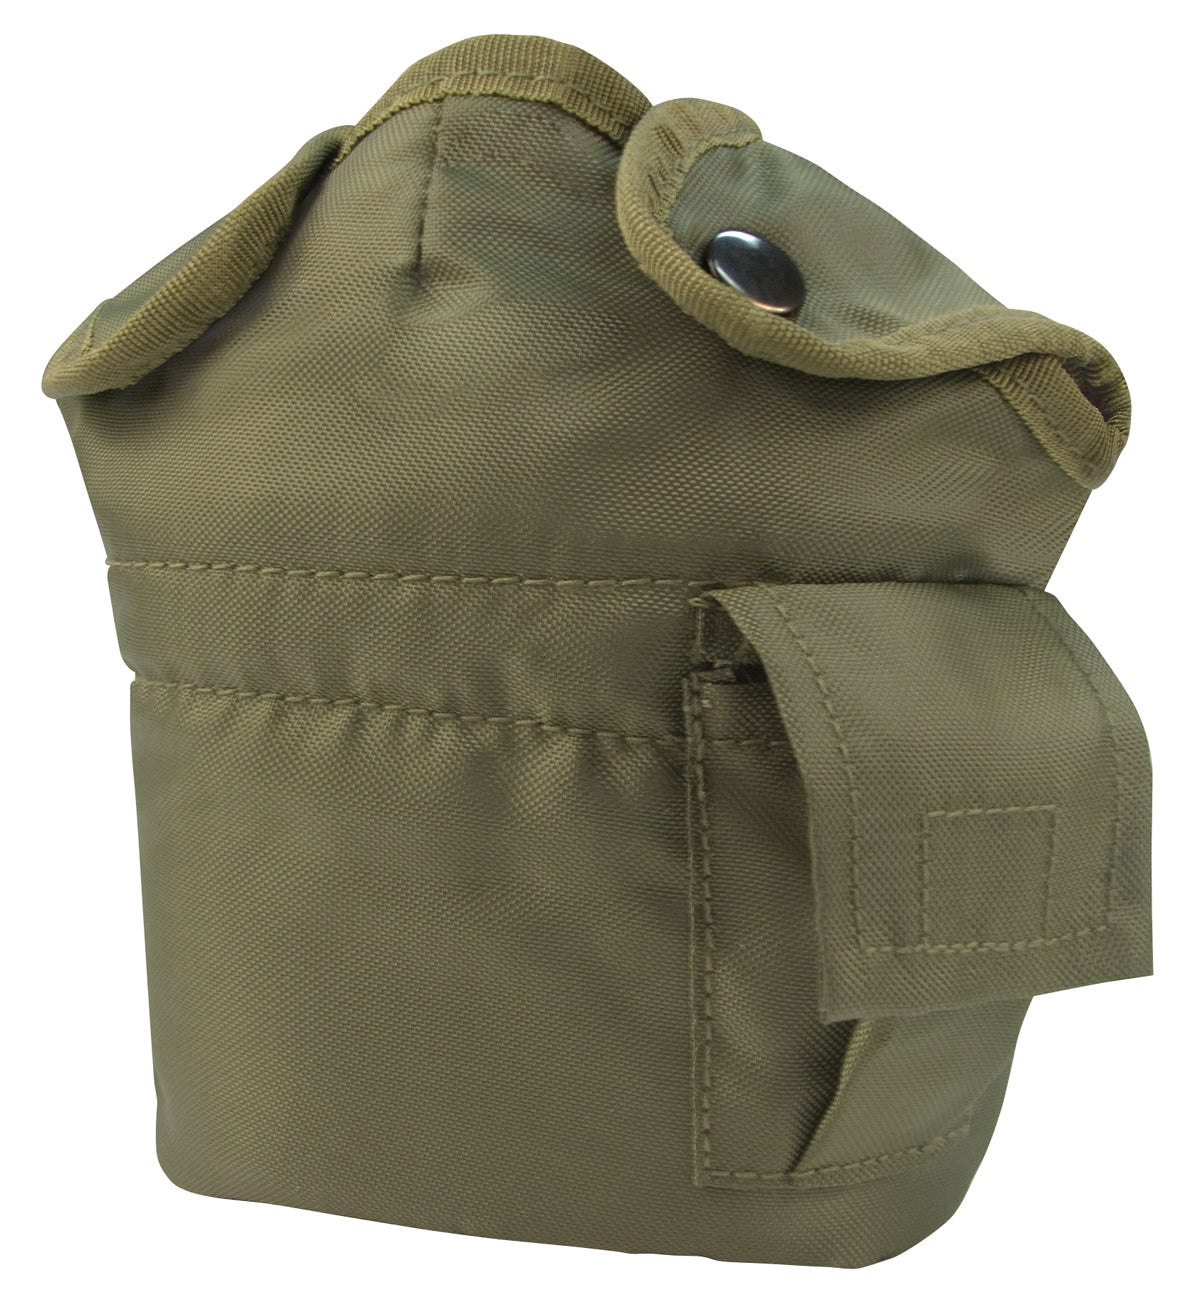 Milspec G.I. Style Canteen Cover Hydration and Water Purification MilTac Tactical Military Outdoor Gear Australia